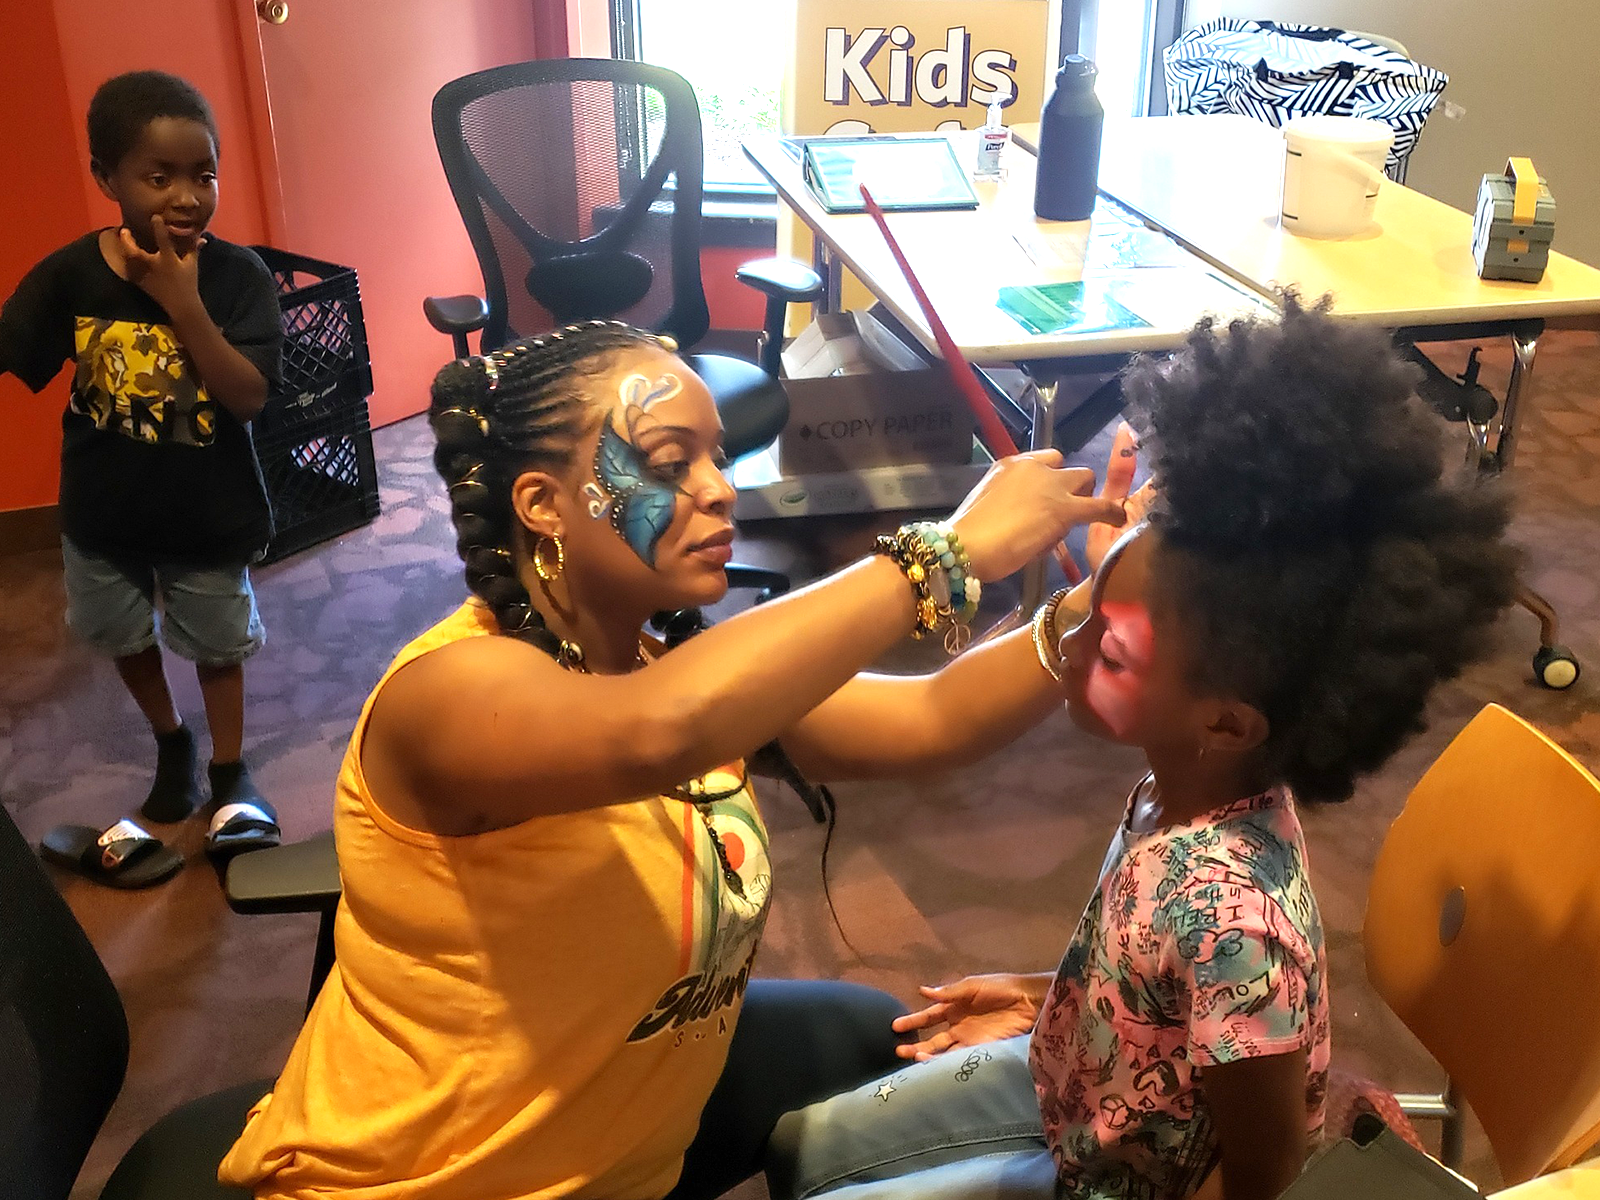 child getting their face painted while another watches